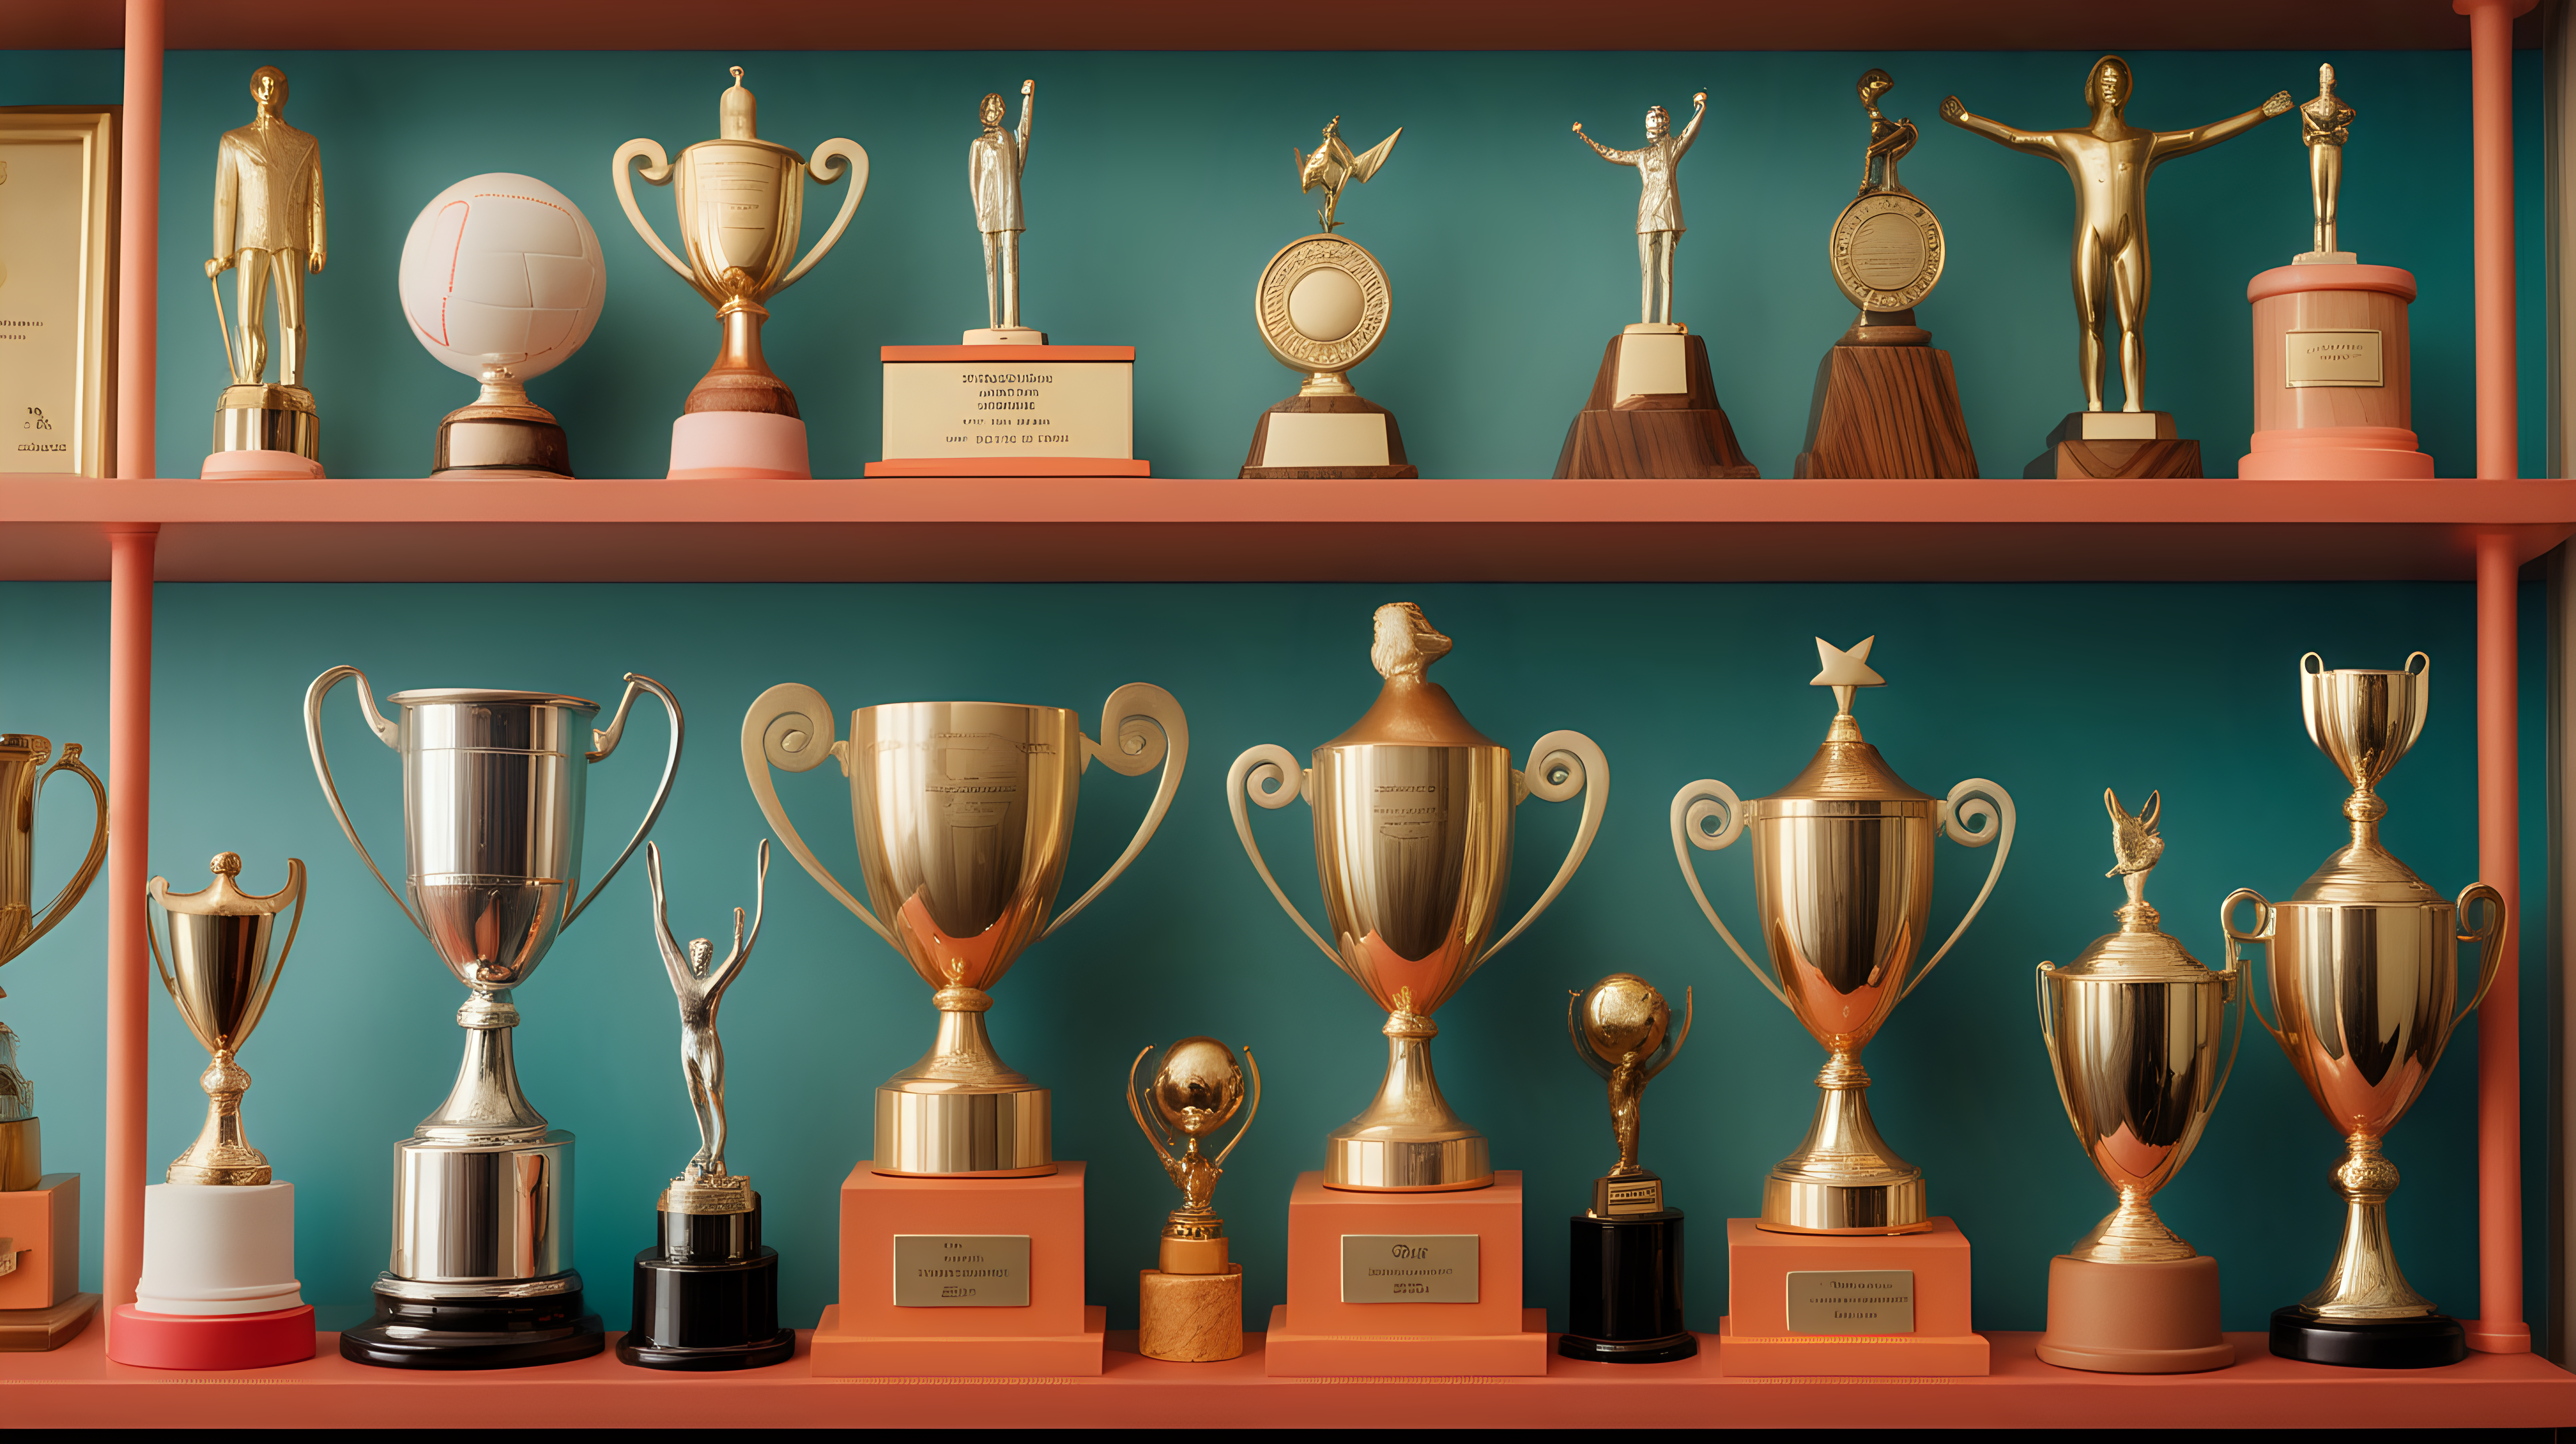 close up, high quality photograph of 10 various trophies and awards on a shelf in the style of a wes anderson movie
